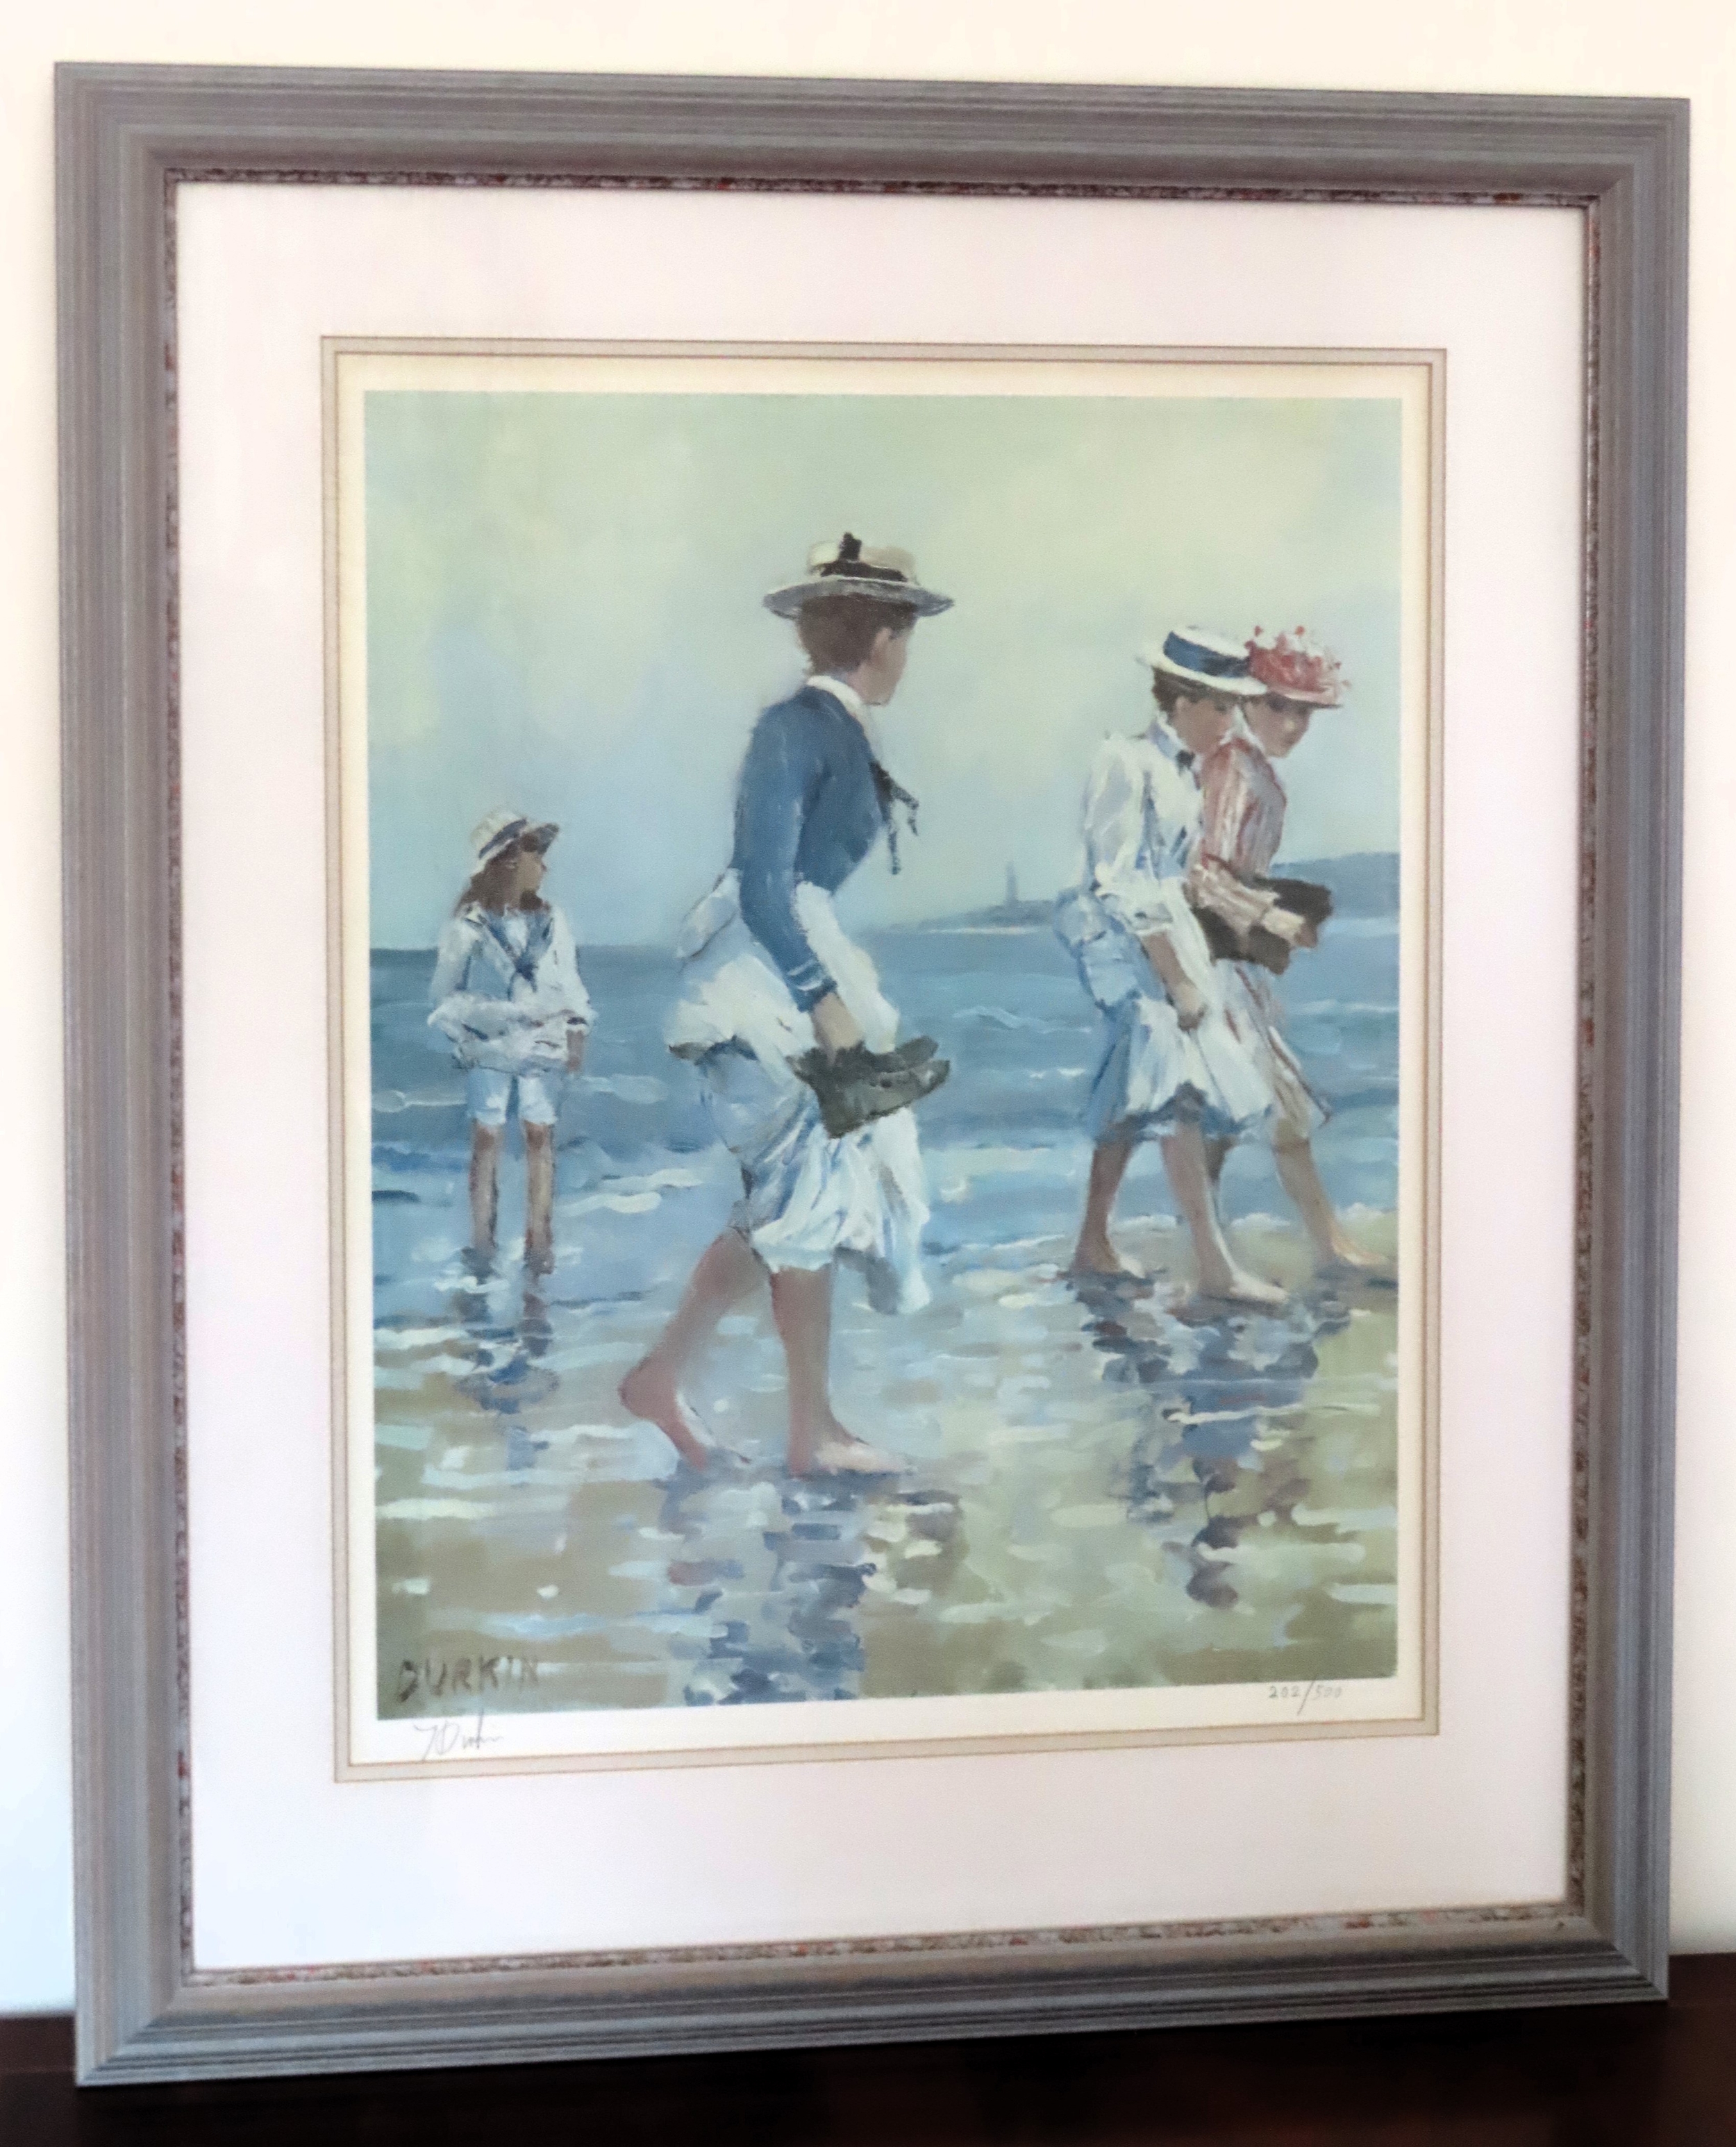 J. Durkin - Framed pencil signed limited edition polychrome print depicting a seaside scene with